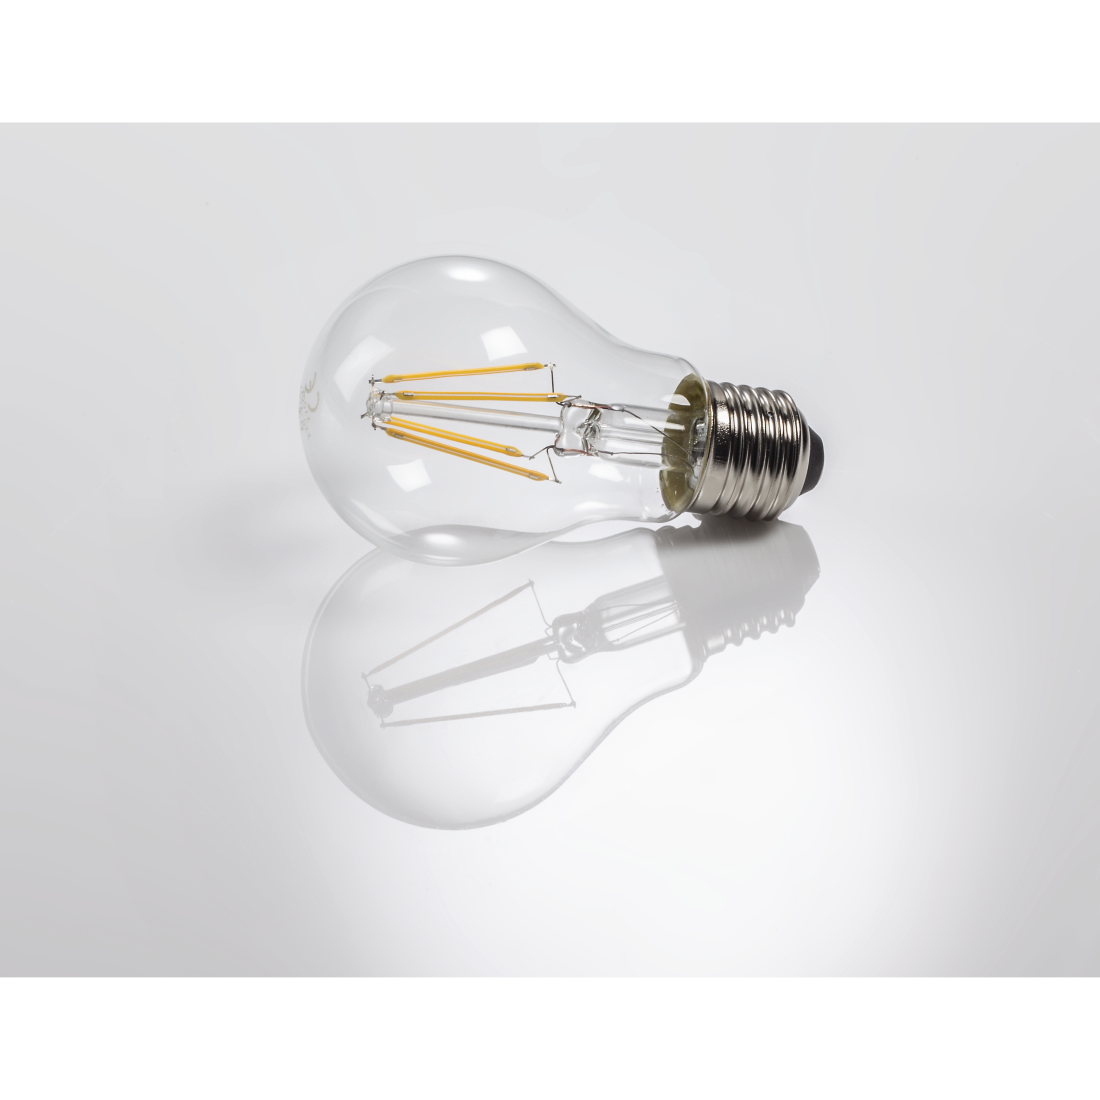 abx3 High-Res Image 3 - Xavax, LED Filament, E27, 1055 lm Replaces 75W, Incandescent Bulb, warm white